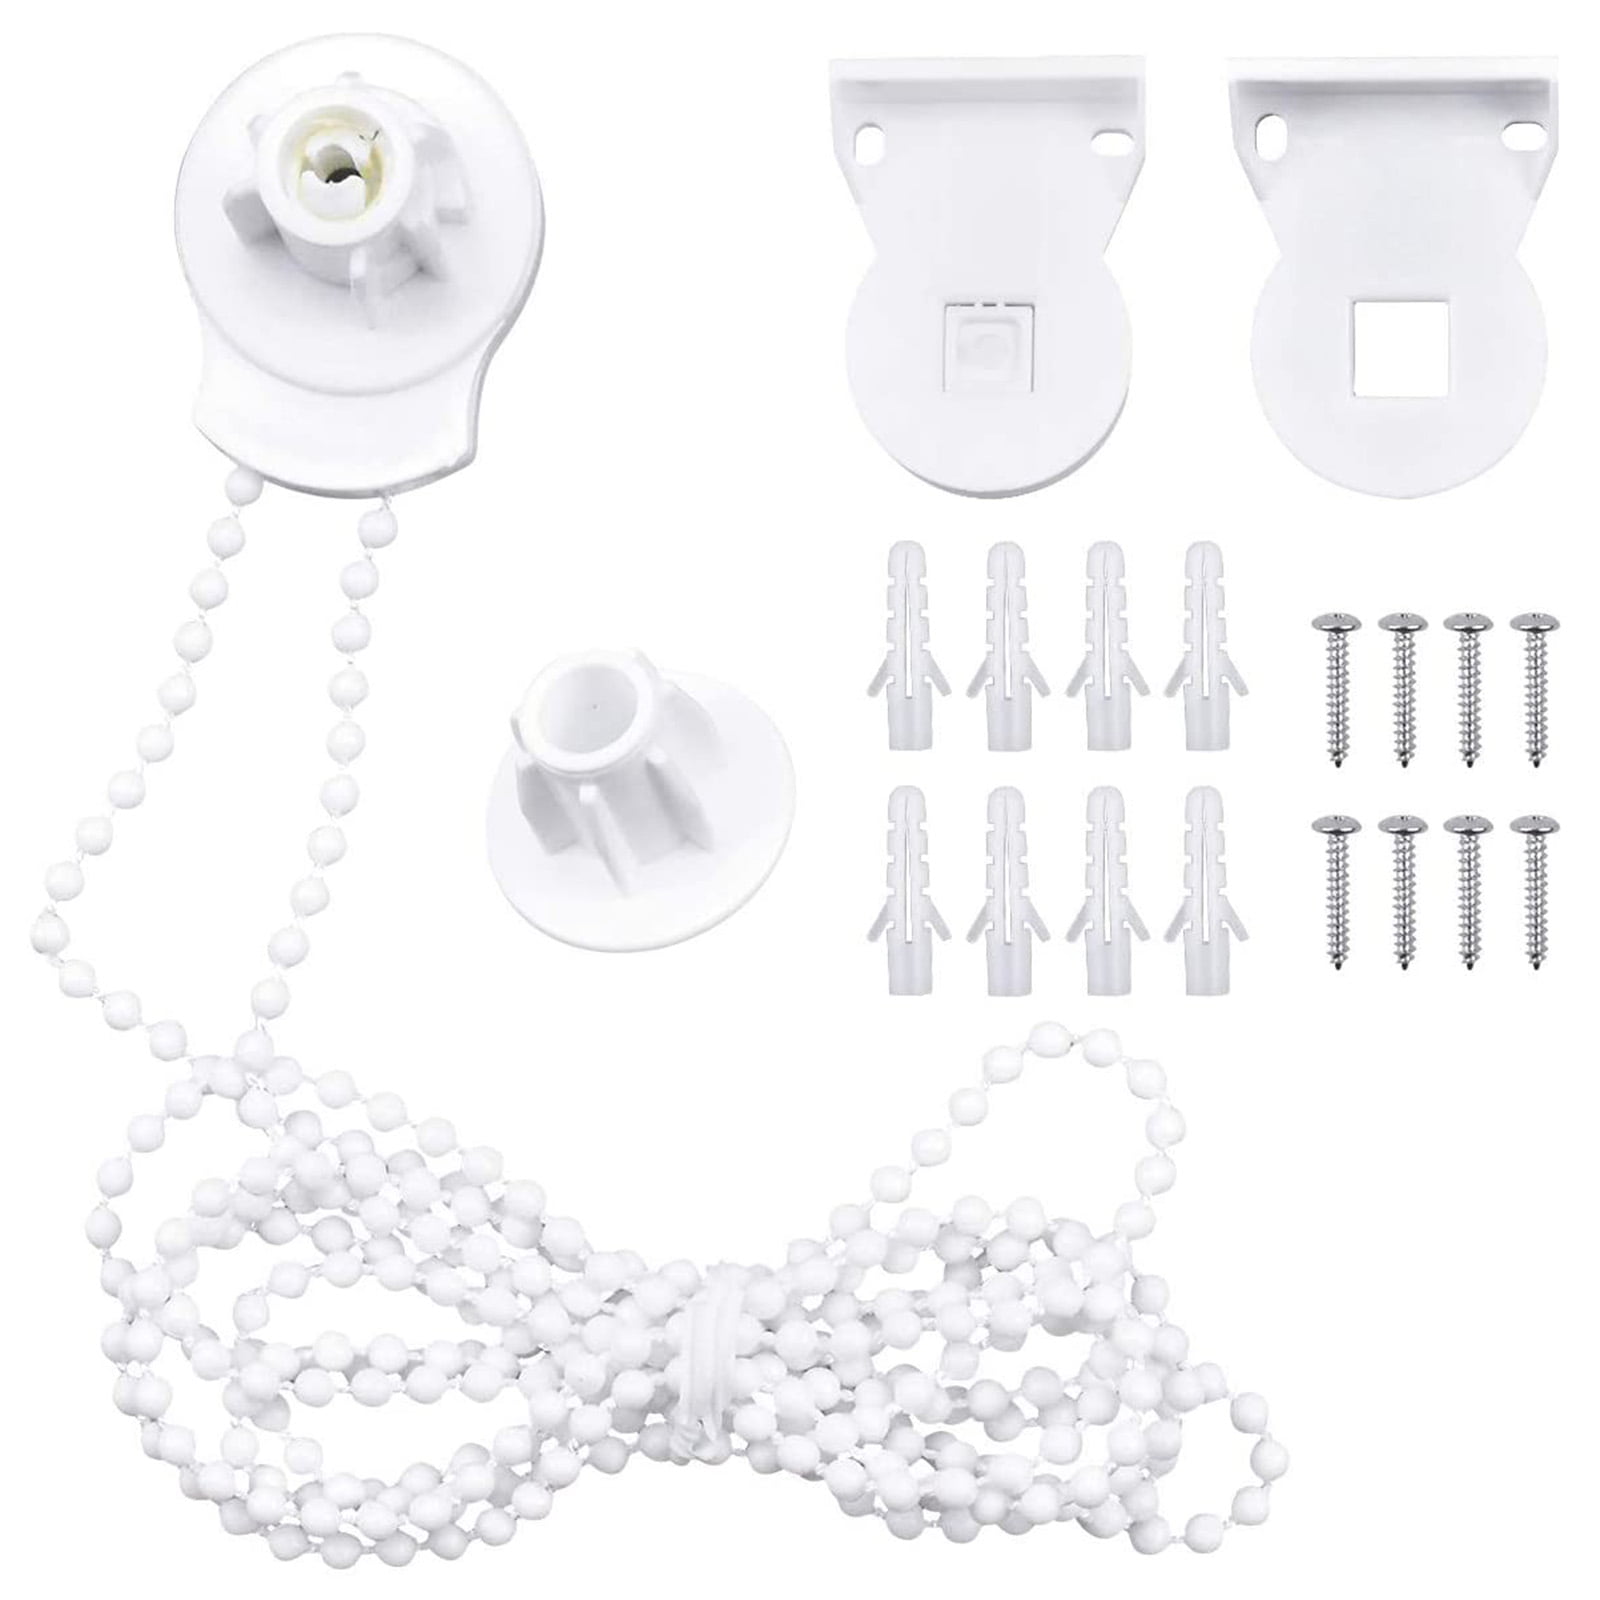 Roller Blind Spares Brackets with Beaded Chain & 2 Child Safety Clips for Windows Home Kitchen Office Use 2 Sets 25mm Roller Blind Fittings Replacement Repair Kit